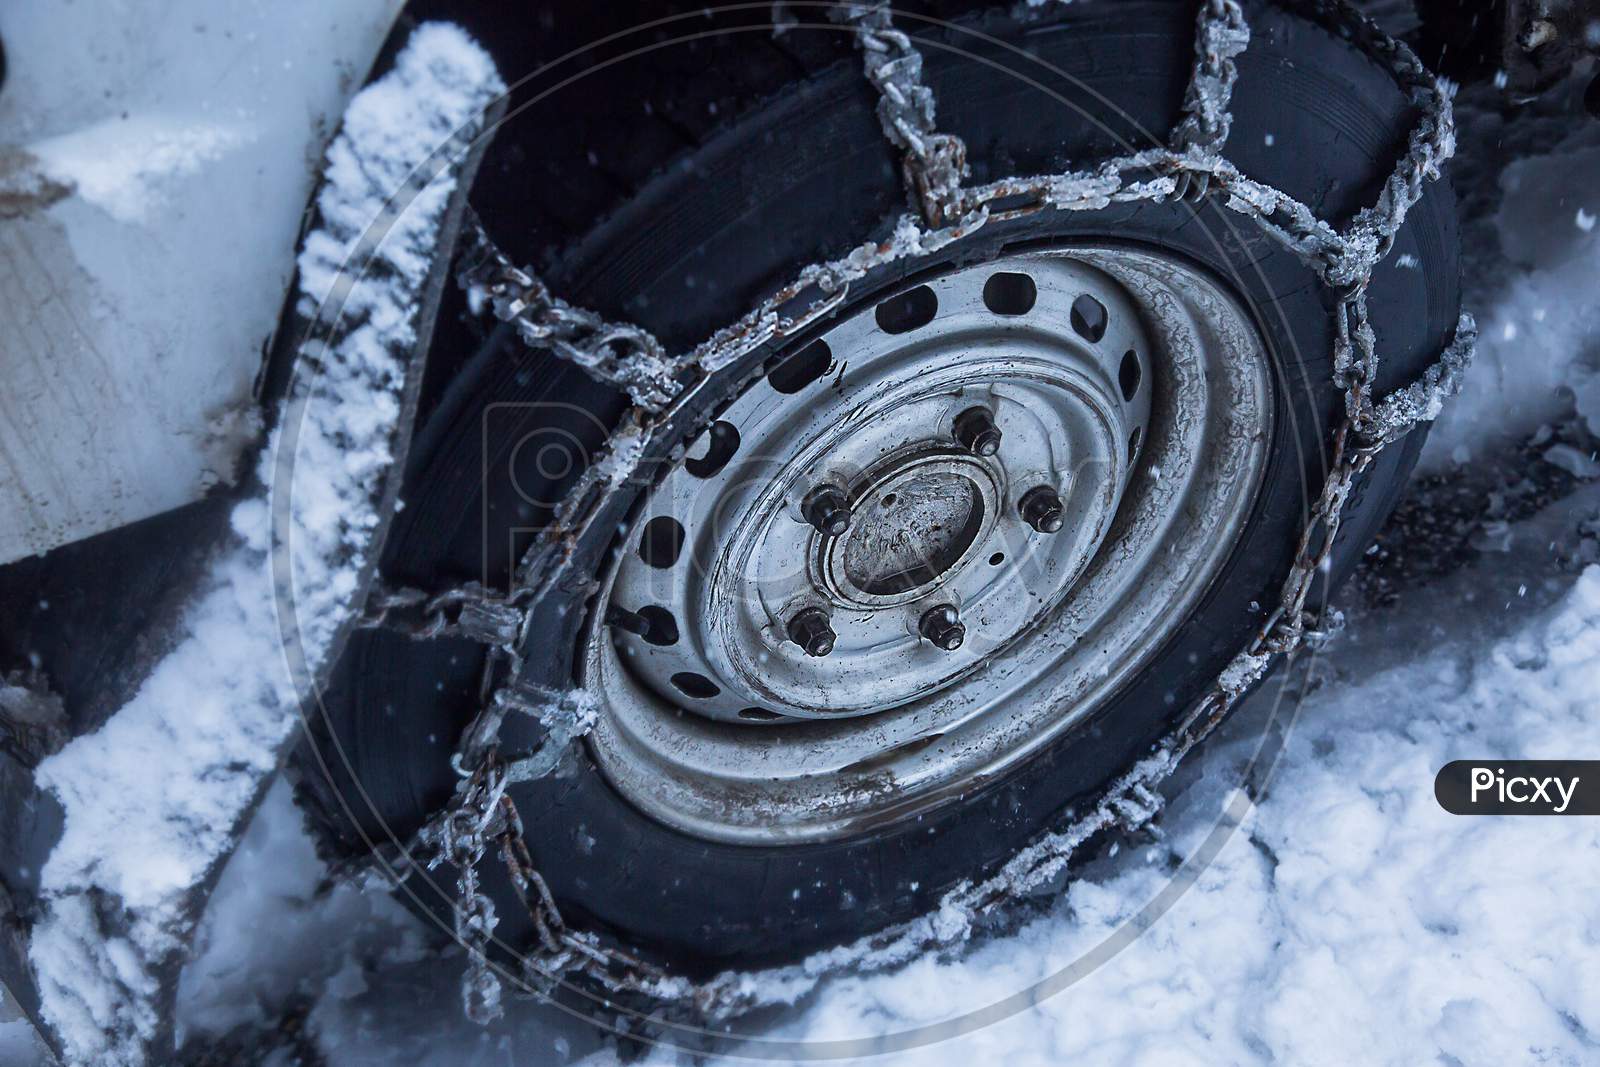 Snow Chains Put On Car Wheel In The Snow, Close-Up - Image